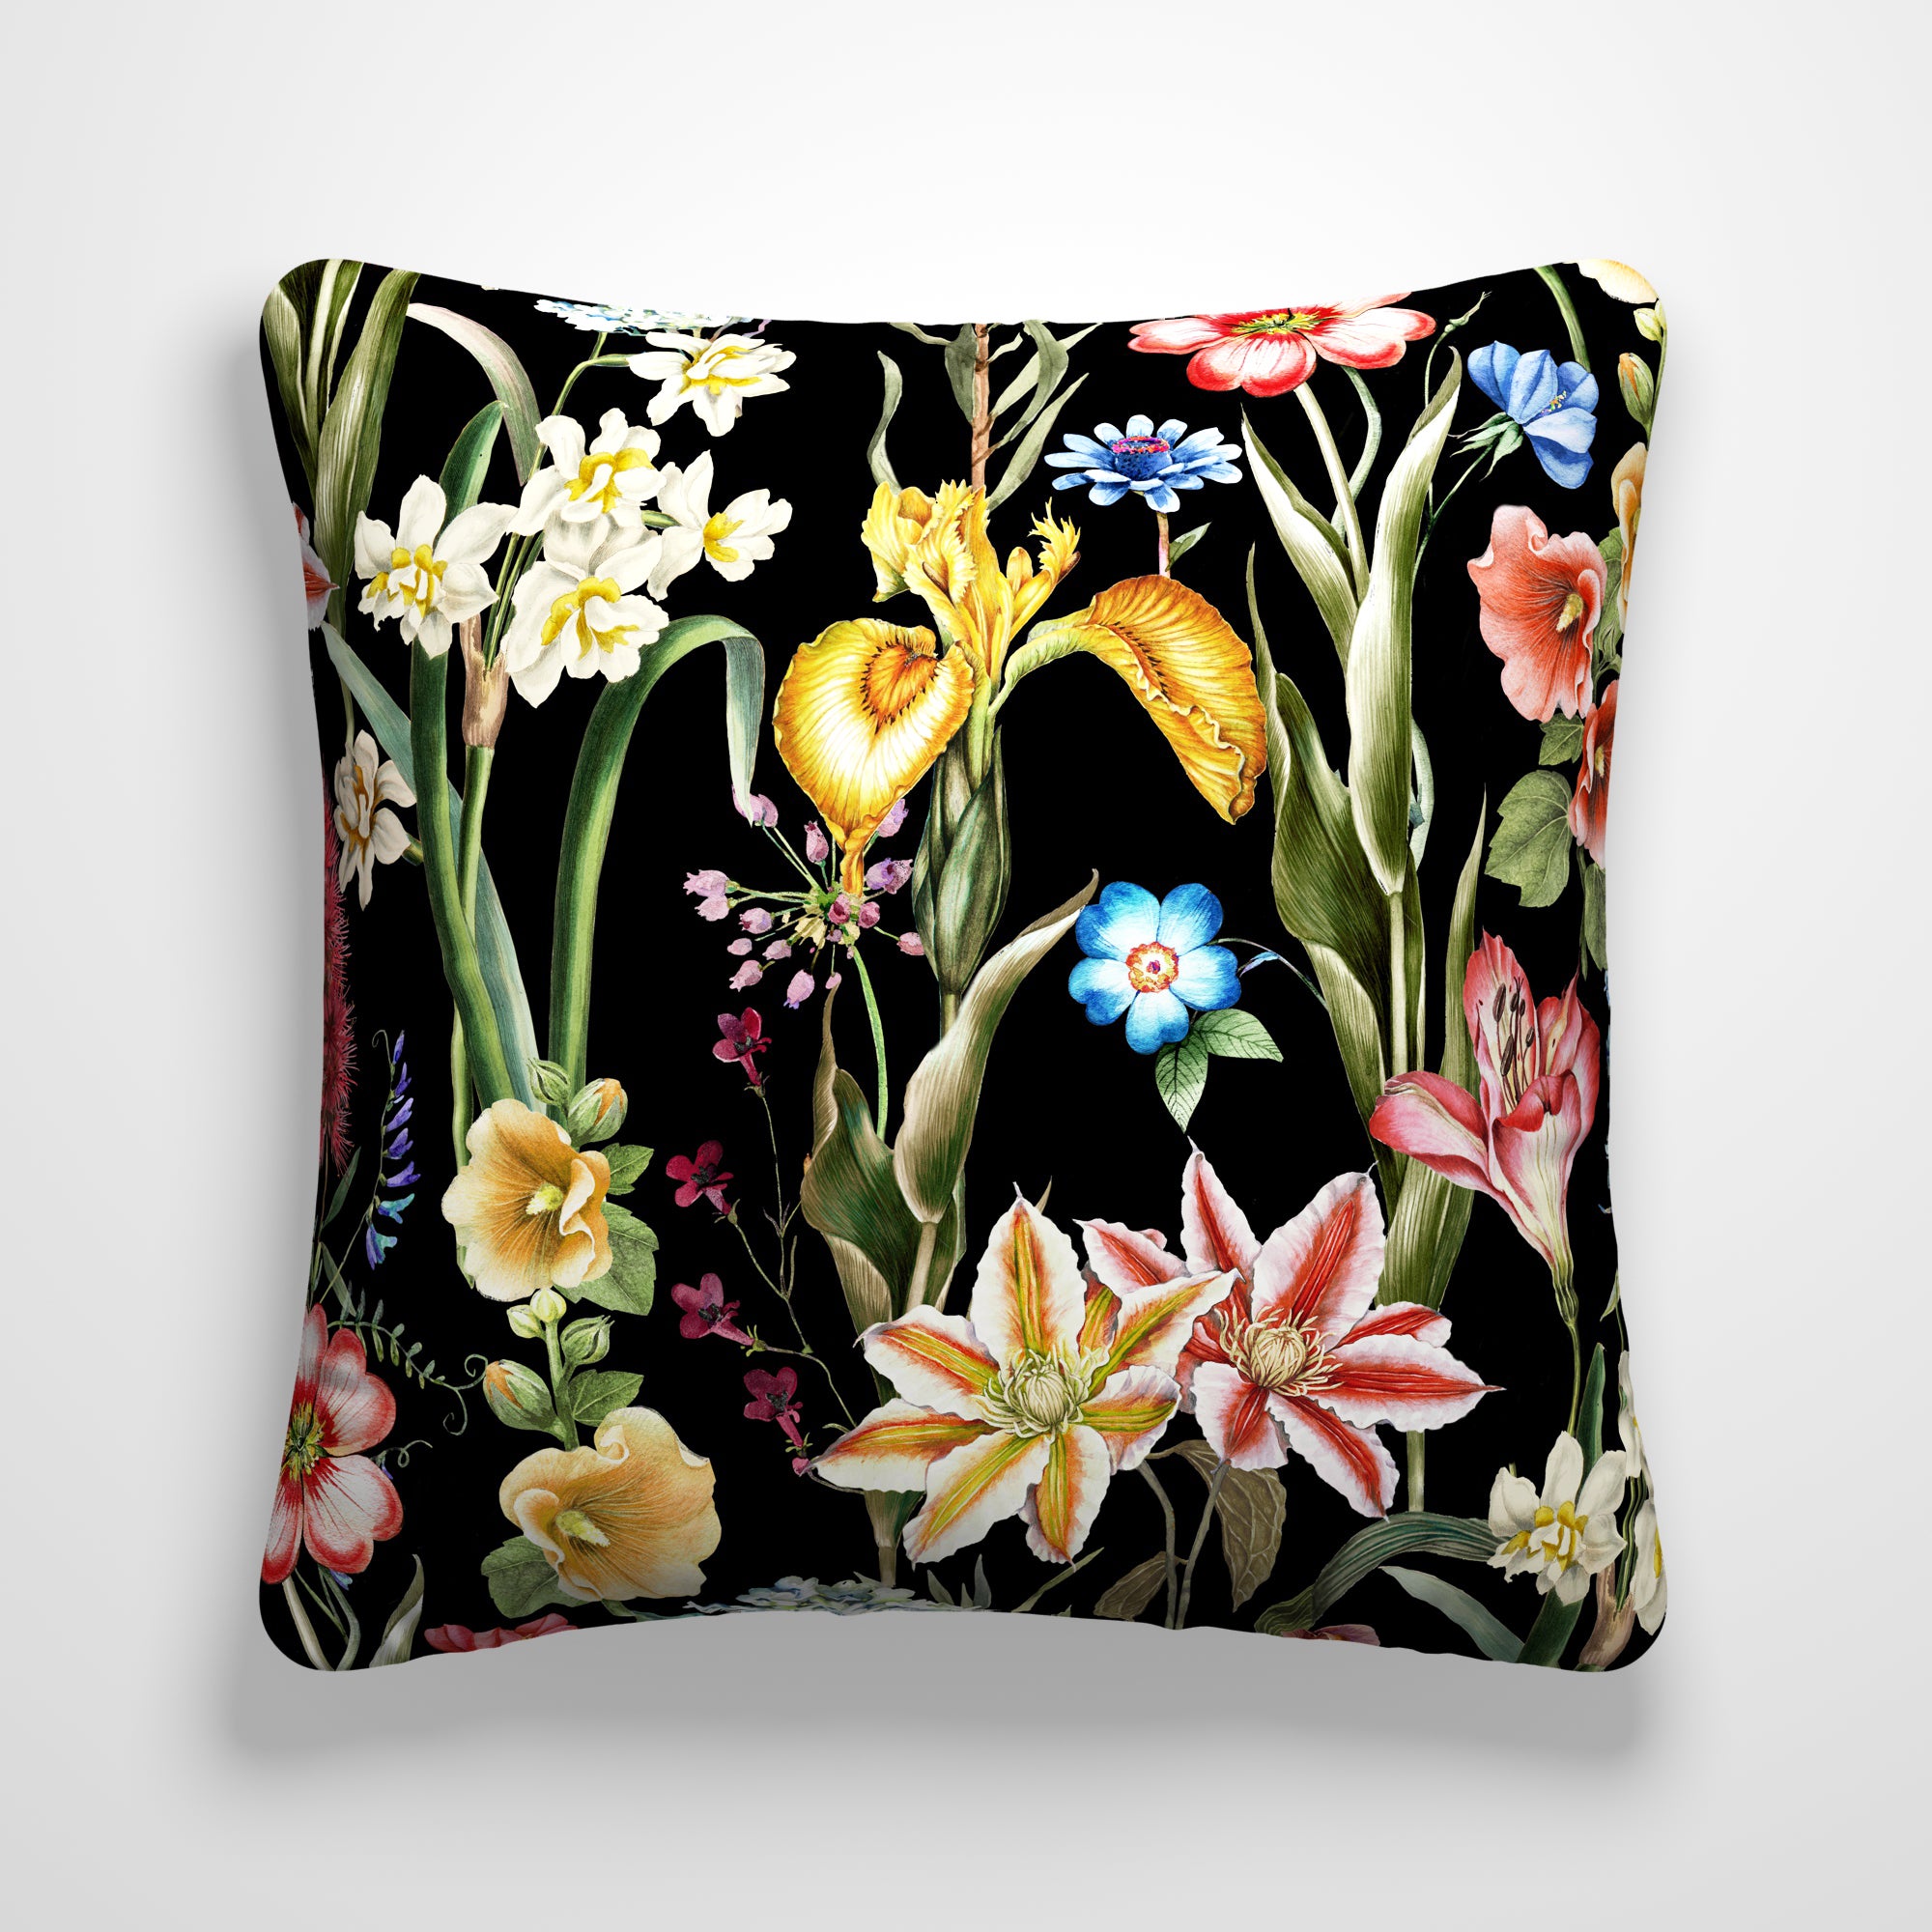 Maximalist Tropical Made to Order Cushion Cover Tropical Black